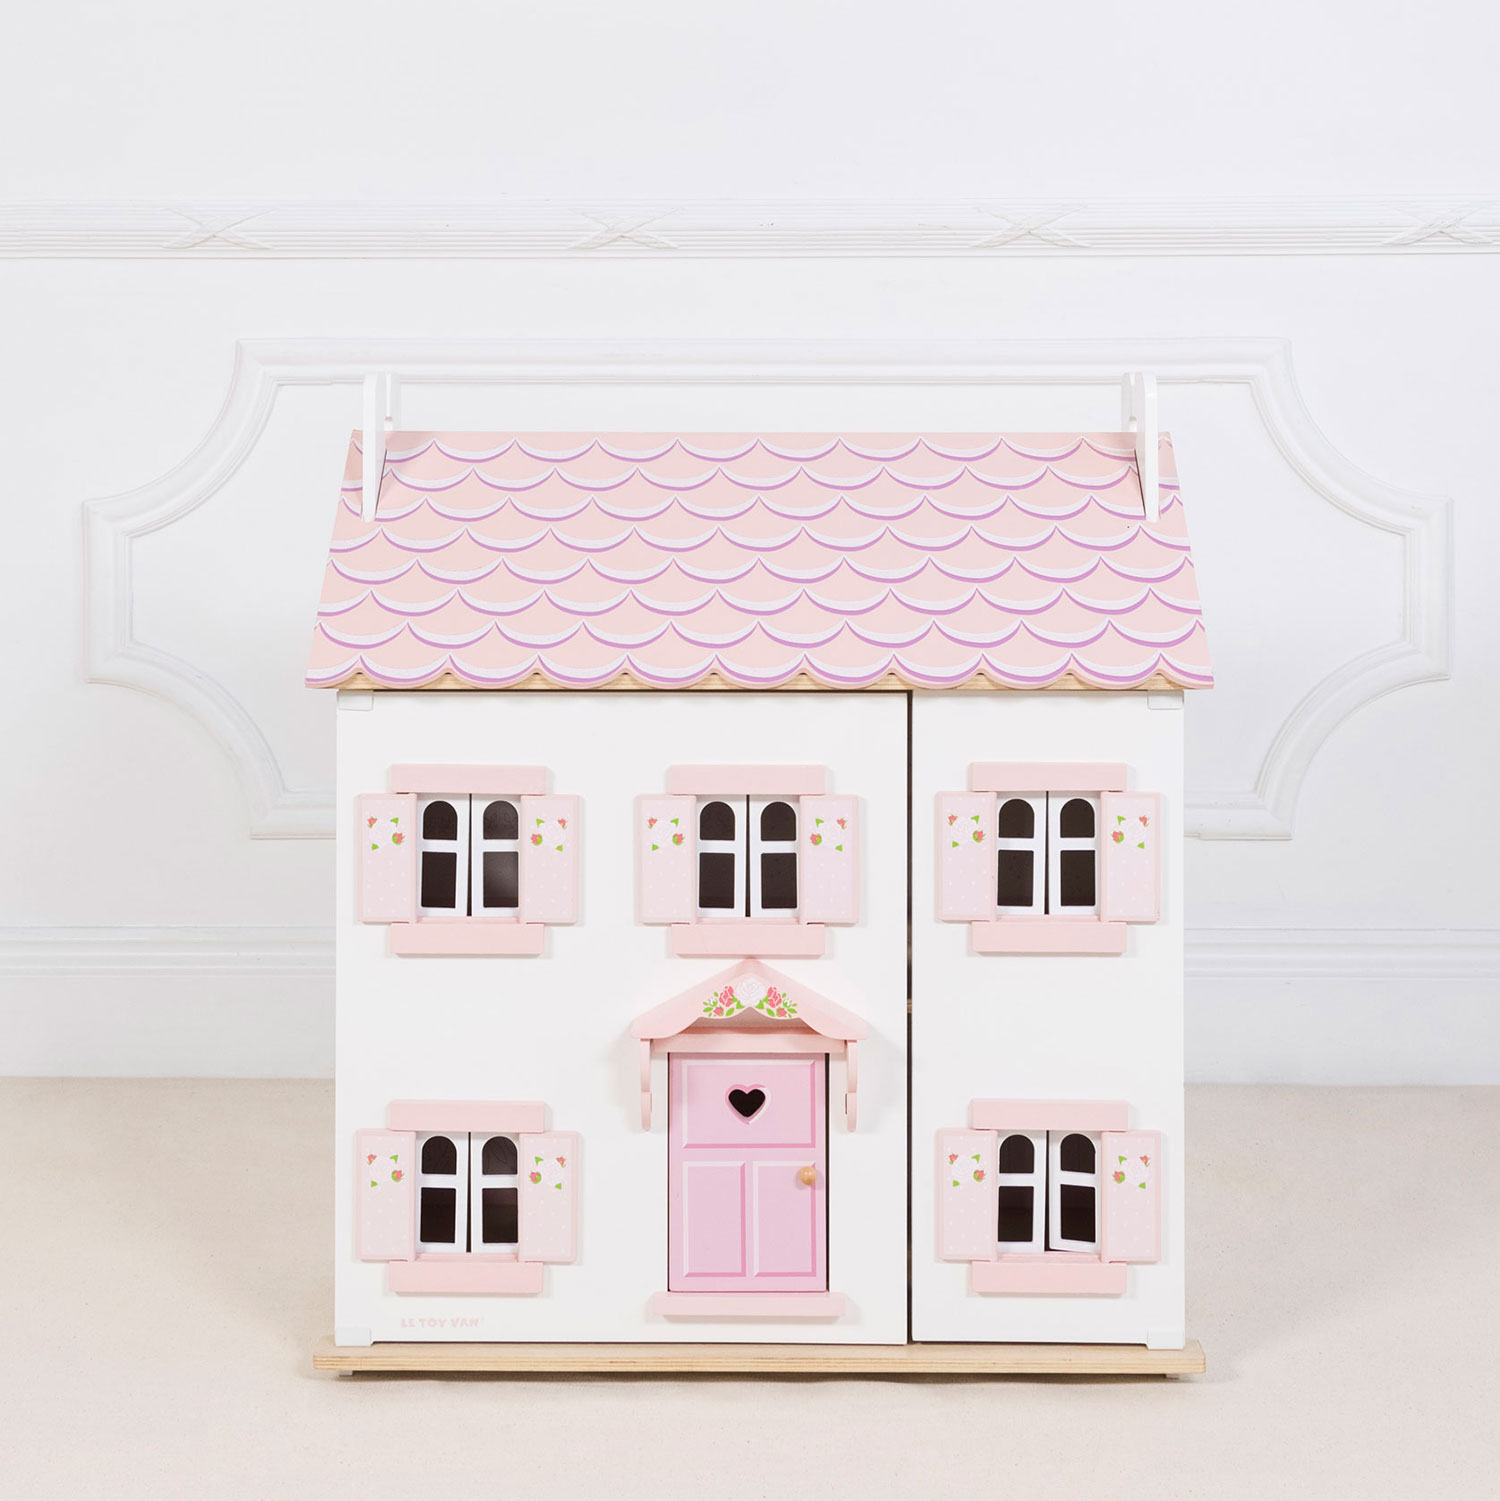 Sophies Puppenhaus / Sophies Wooden Dolls House